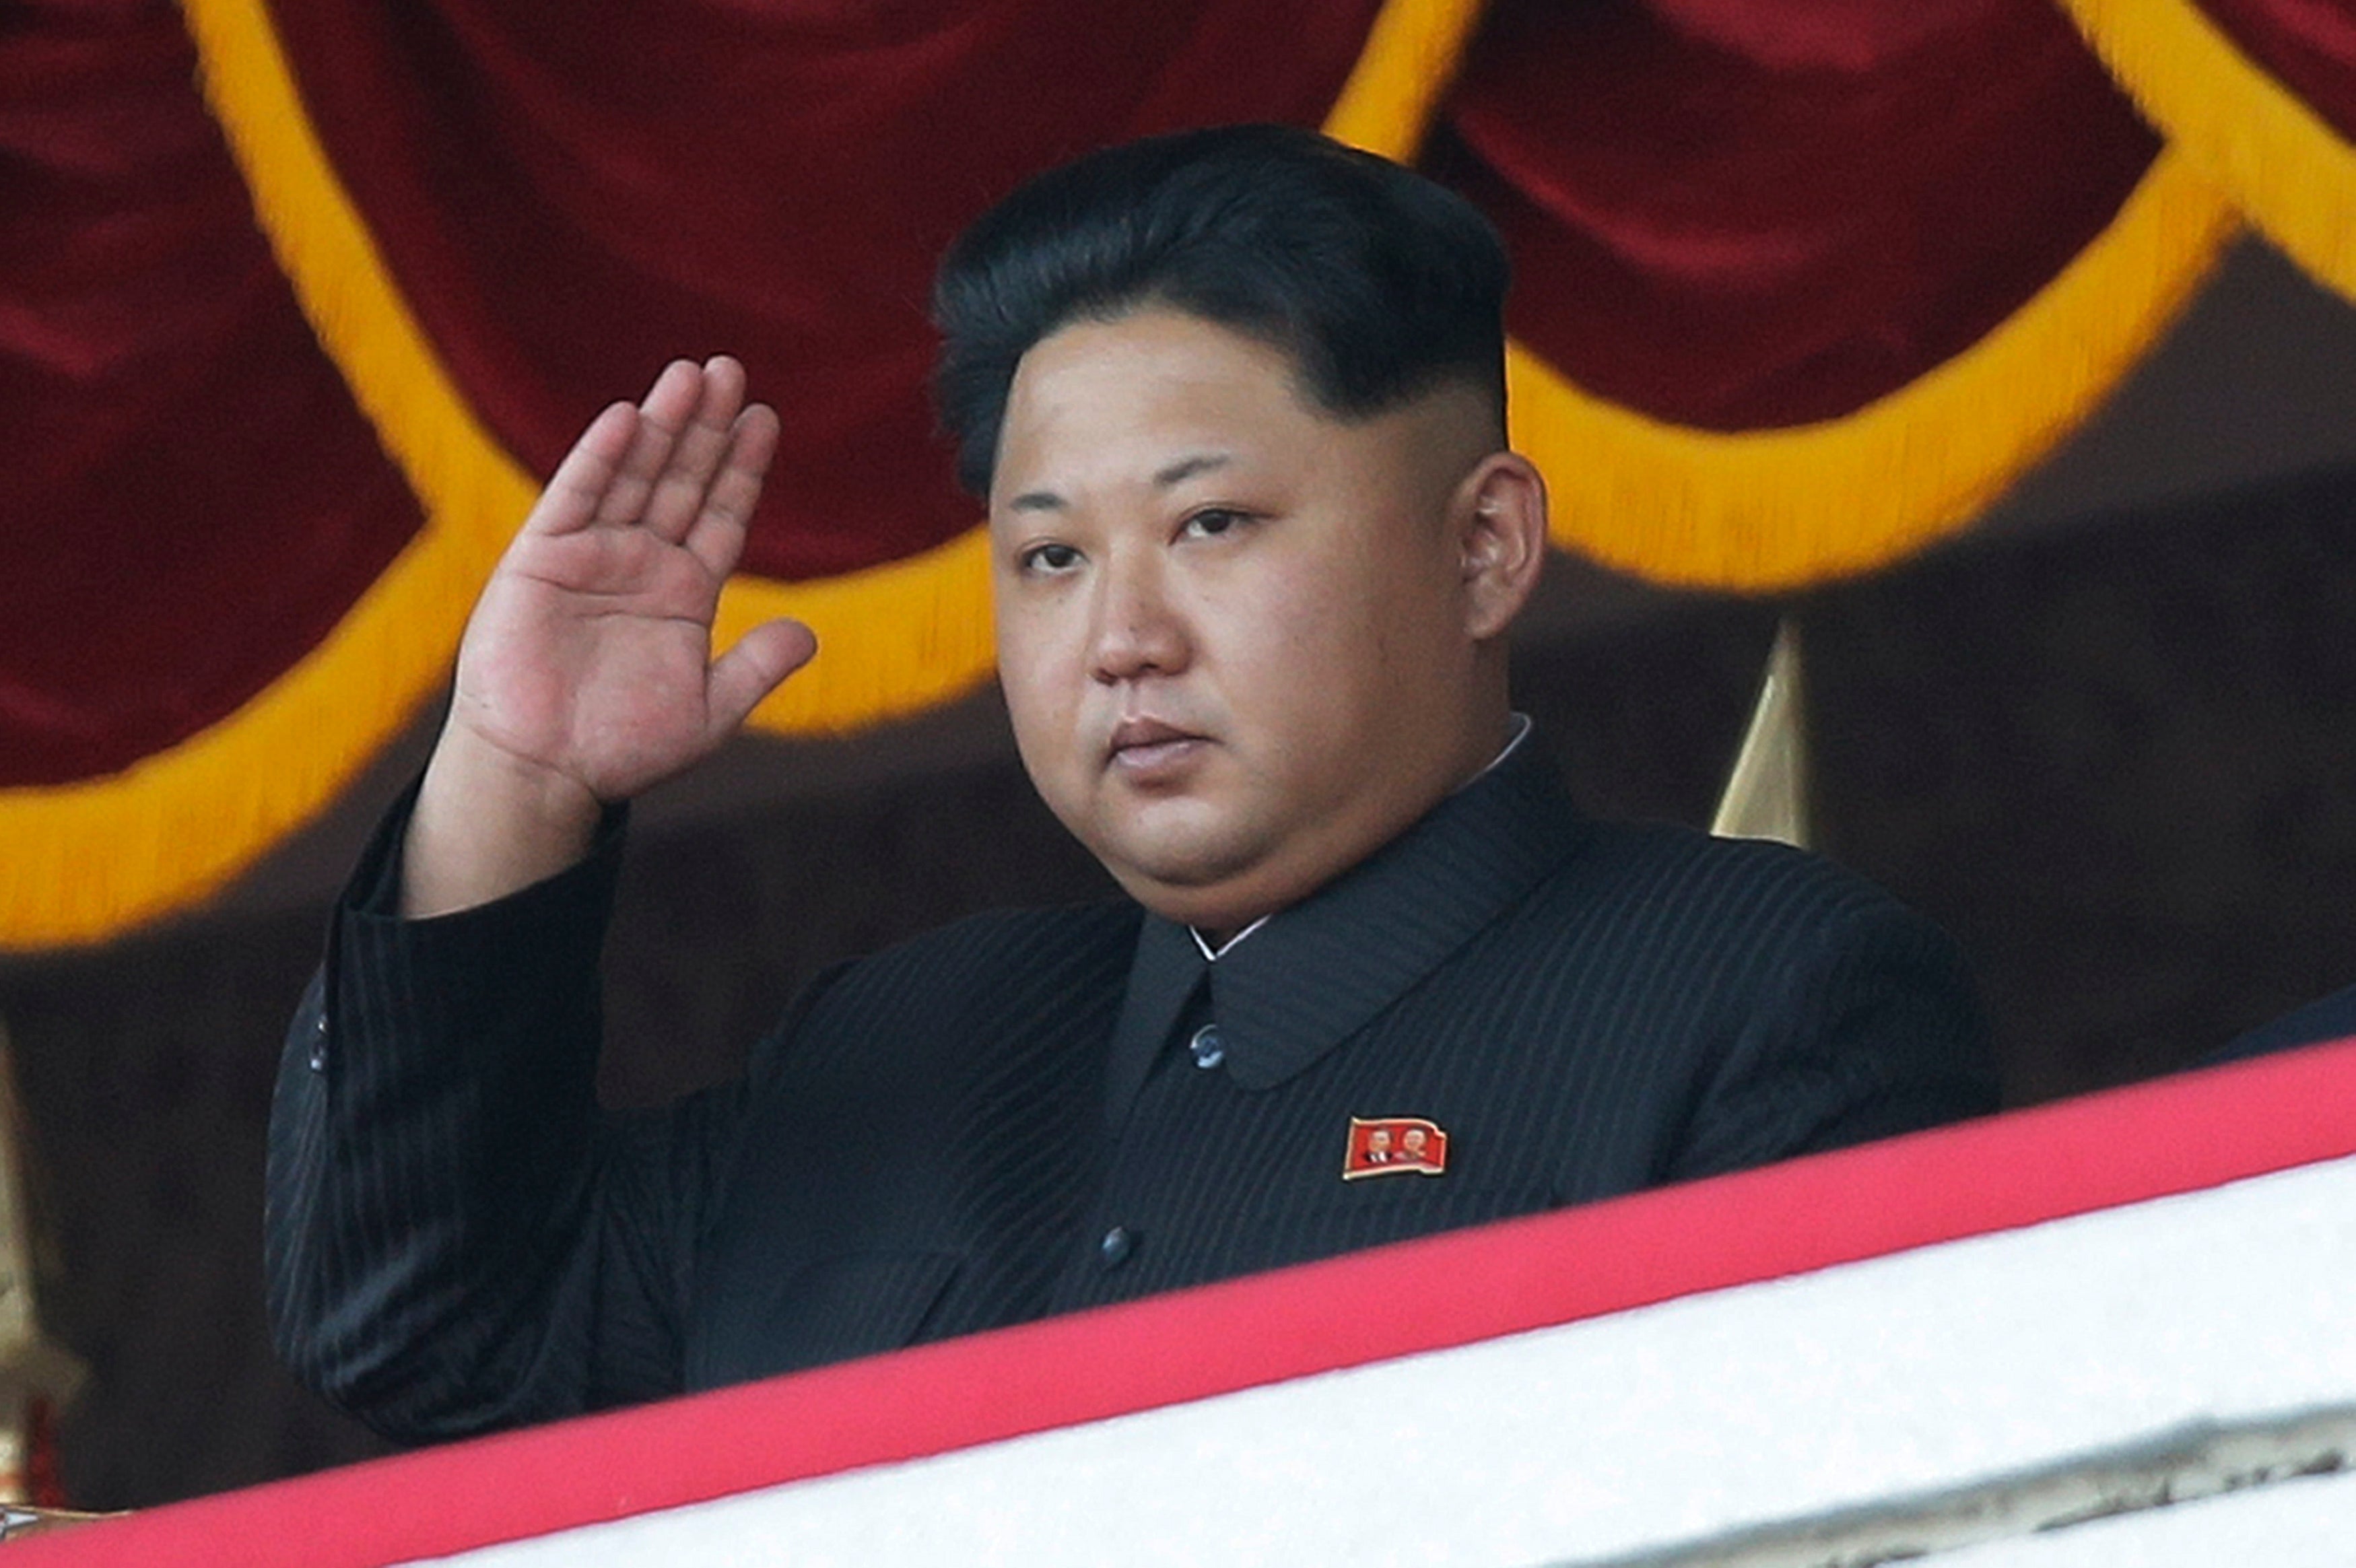 Baidu now allows users to search for Kim Jong-Un's 'pig' nickname